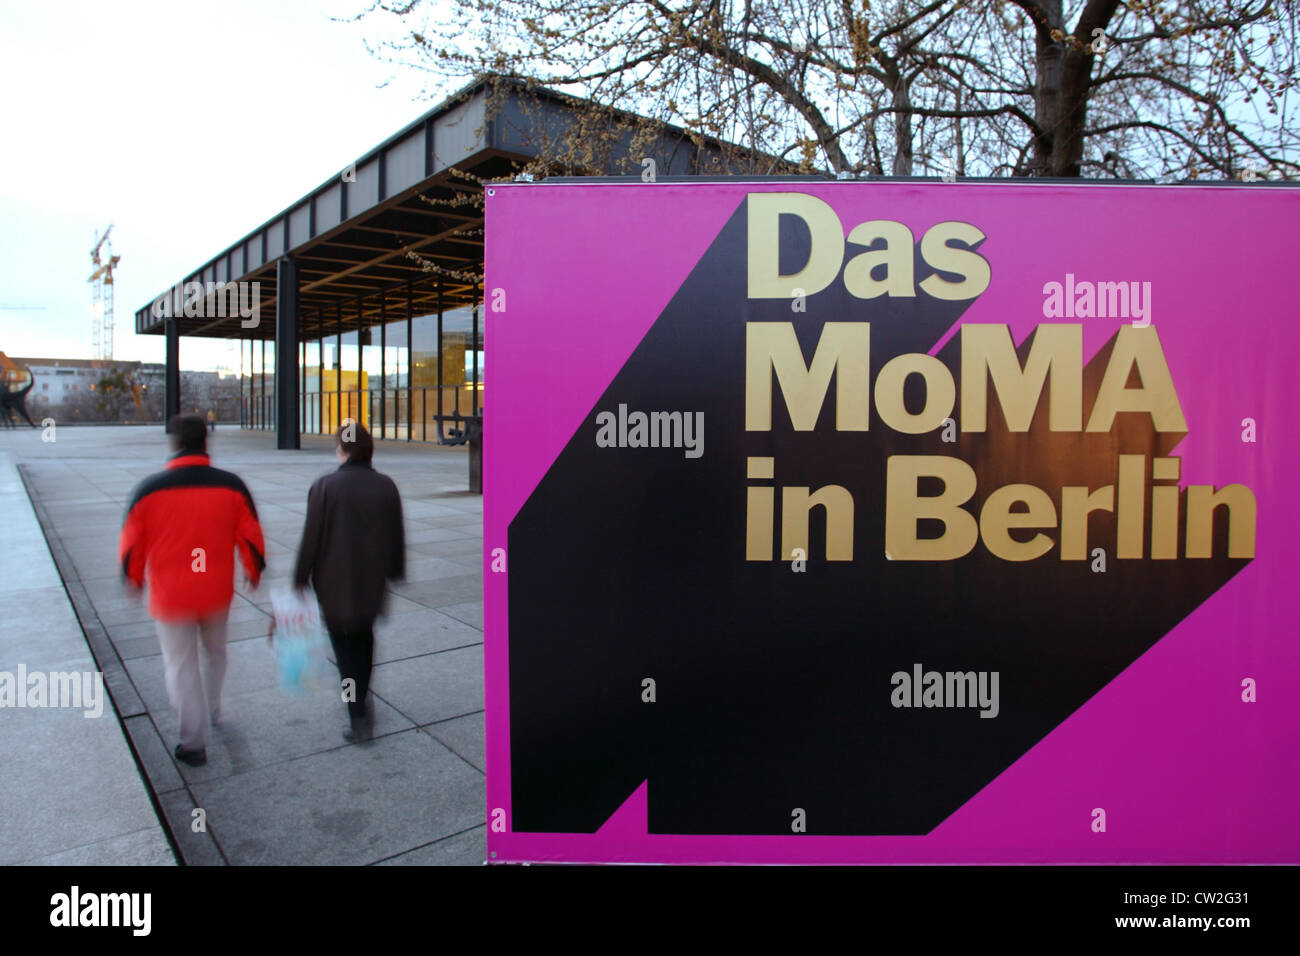 Laboratorium Styre fremtid Moma In Berlin High Resolution Stock Photography and Images - Alamy